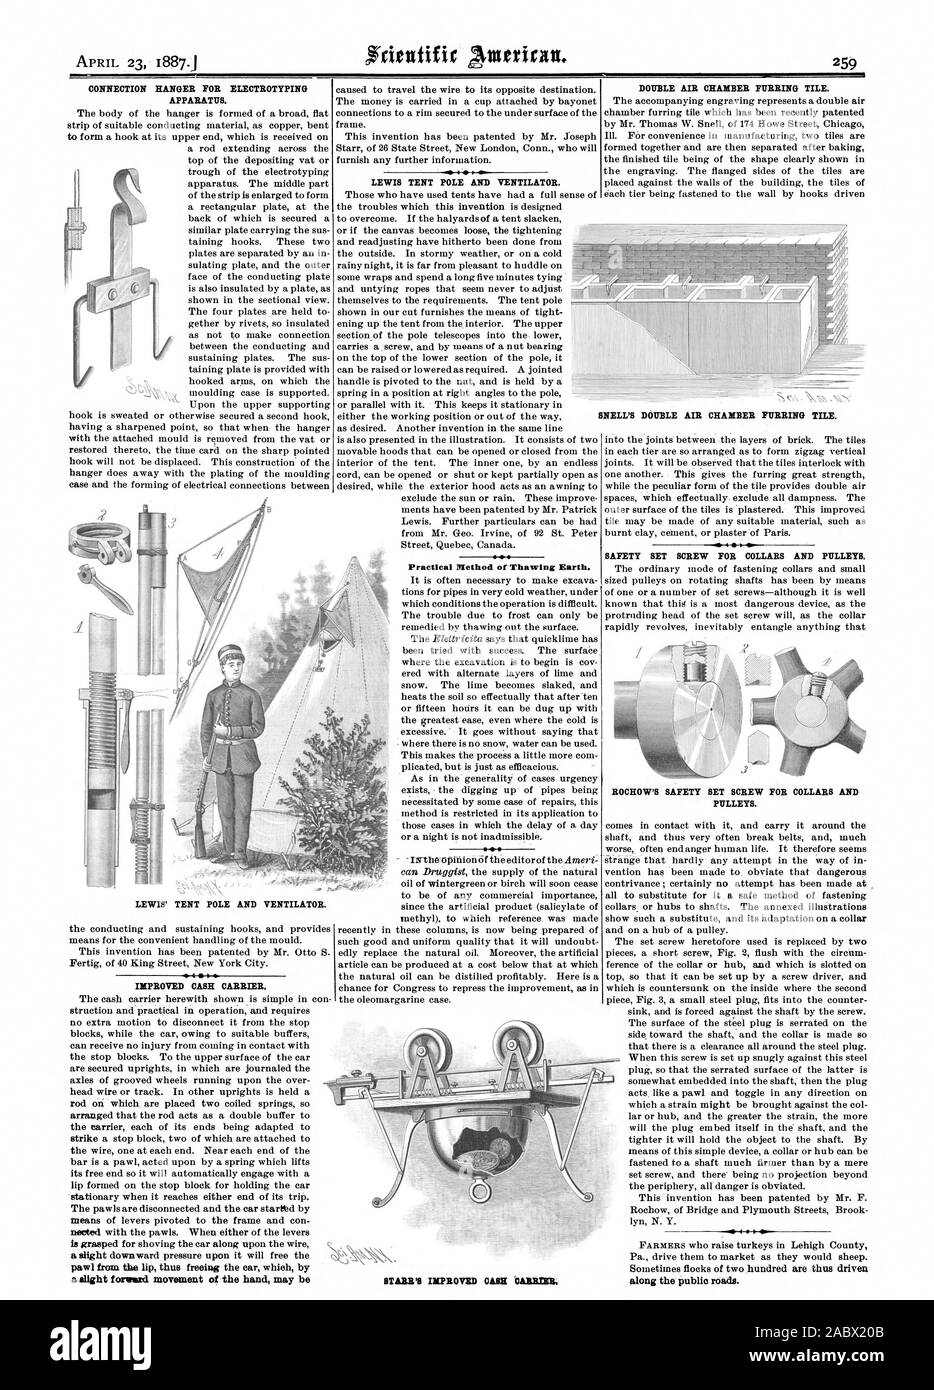 CONNECTION HANGER FOR ELECTROTYPING APPARATUS. IMPROVED CASH CARRIER. a slight formard movement of the hand may be LEWIS TENT POLE AND VENTILATOR. Practical Method of Thawing Earth. DOUBLE AIR CHAMBER FURRING TILE. SAFETY SET SCREW FOR COLLARS AND PULLEYS. ROCHOW1 SAFETY SET SCREW FOR COLLARS AND PULLEYS. STARR'S IMPROVED CASH CARRIER. -Li SNELL'S DOUBLE AIR CHAMBER FURRING TILE. along the public roads., scientific american, 1887-04-23 Stock Photo